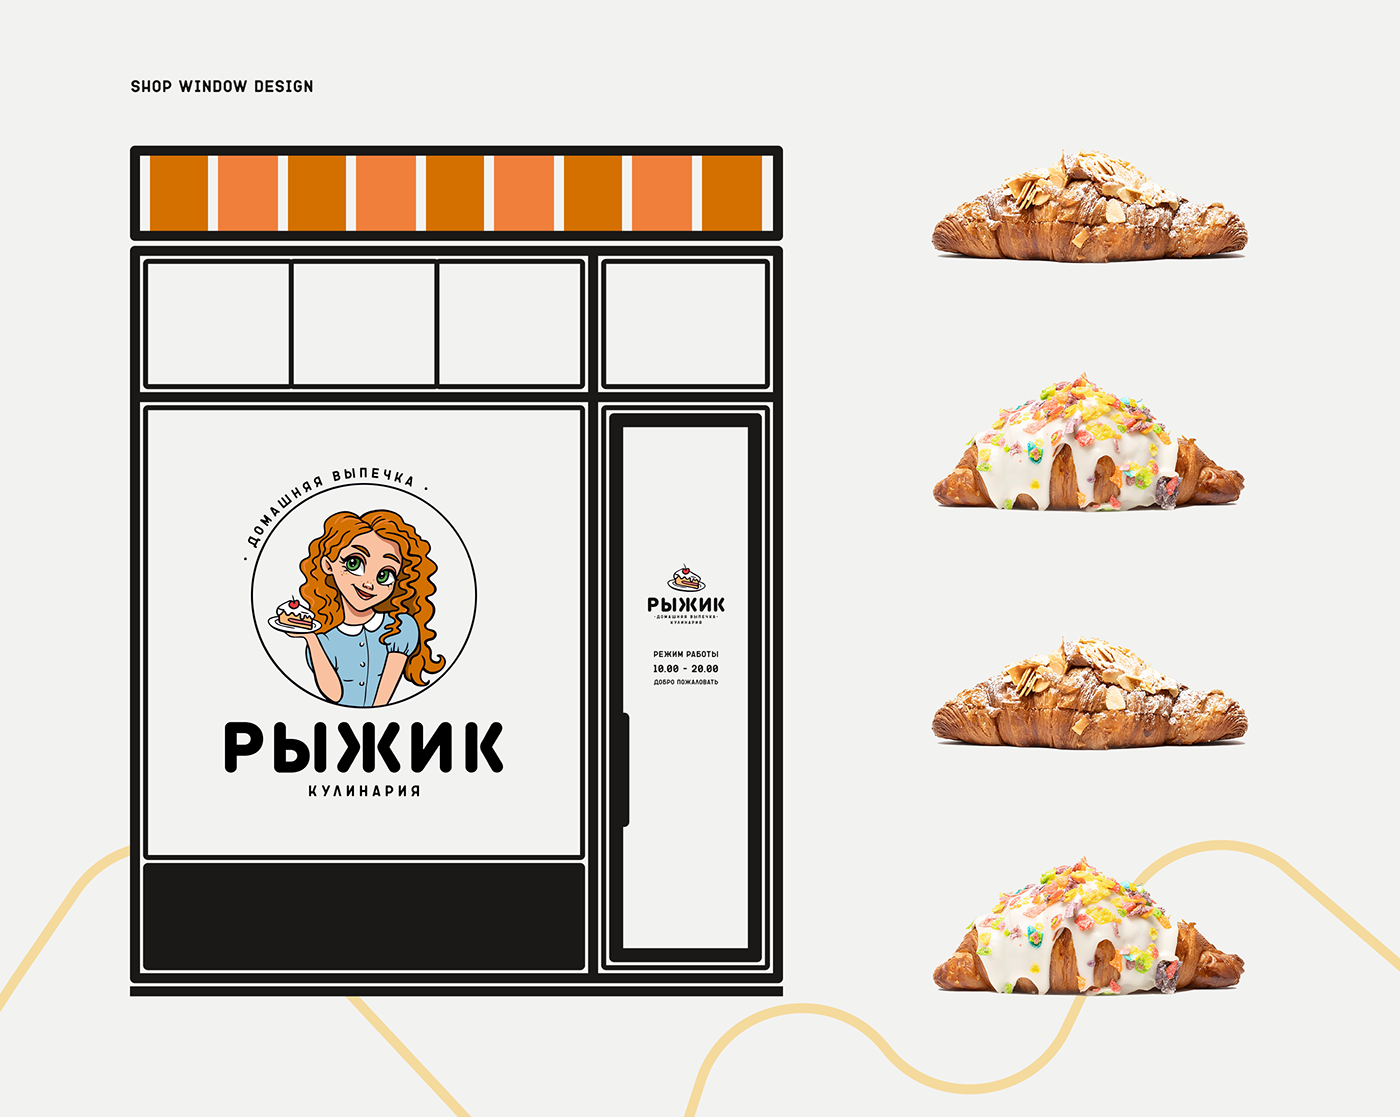 brand identity visual identity Logo Design bakery branding Brand Design graphic design  brand guidelines Packaging cooking 𝖠𝖽𝗈𝖻𝖾 𝖨𝗅𝗅𝗎𝗌𝗍𝗋𝖺𝗍𝗈𝗋